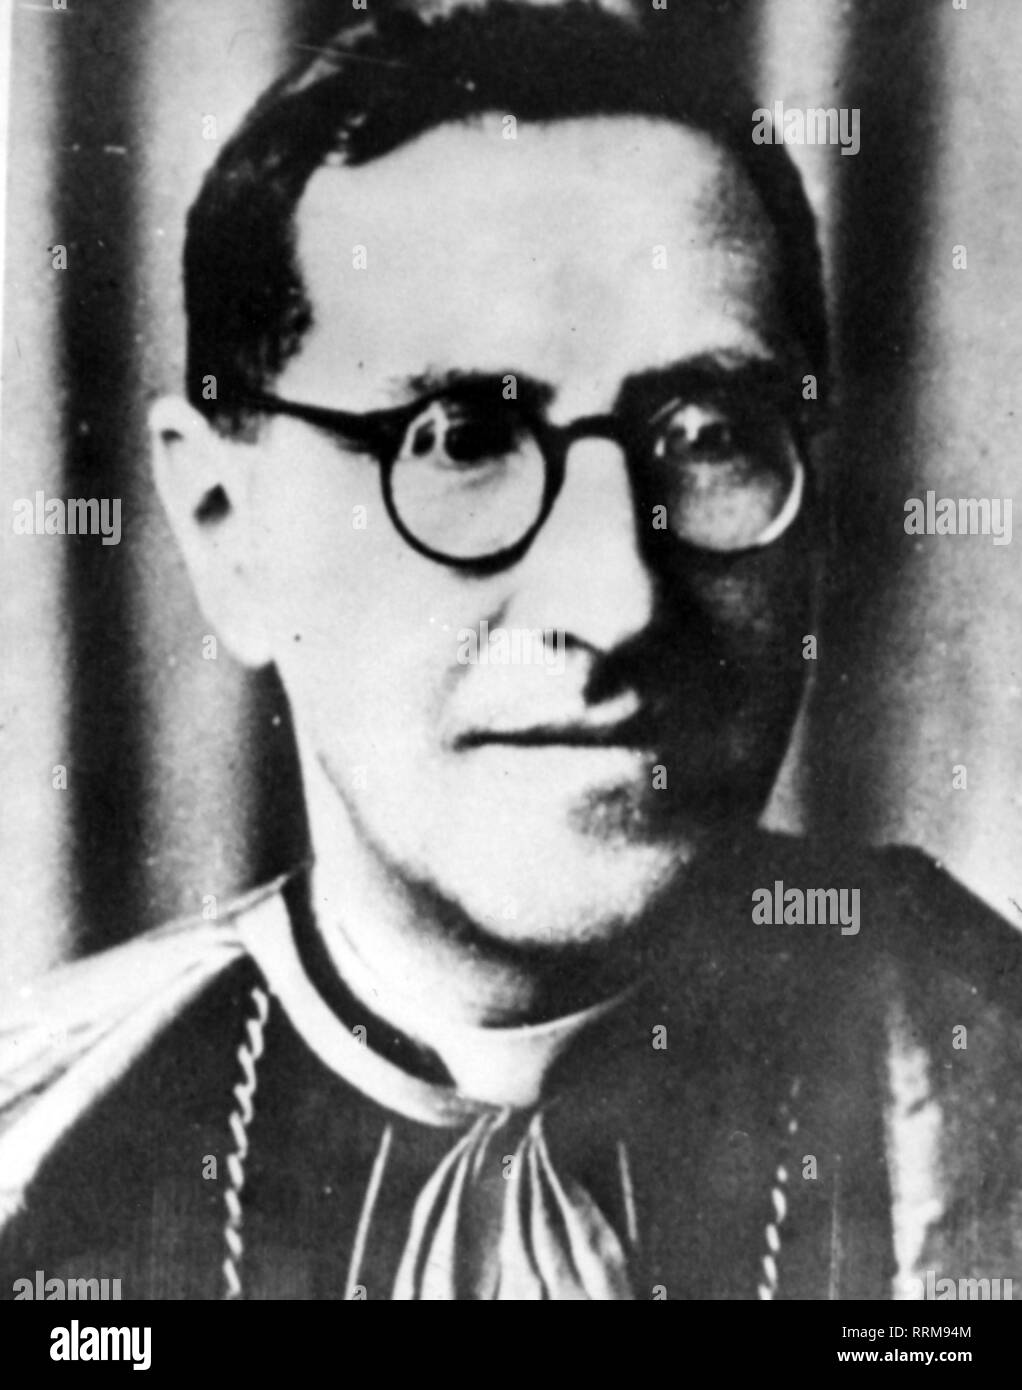 Siri, Giuseppe, 20.5.1906 - 2.5.1989, Italian clergyman, Archbishop of Genoa 14.5.1946 - 6.6.1981, portrait, 1958, Additional-Rights-Clearance-Info-Not-Available Stock Photo